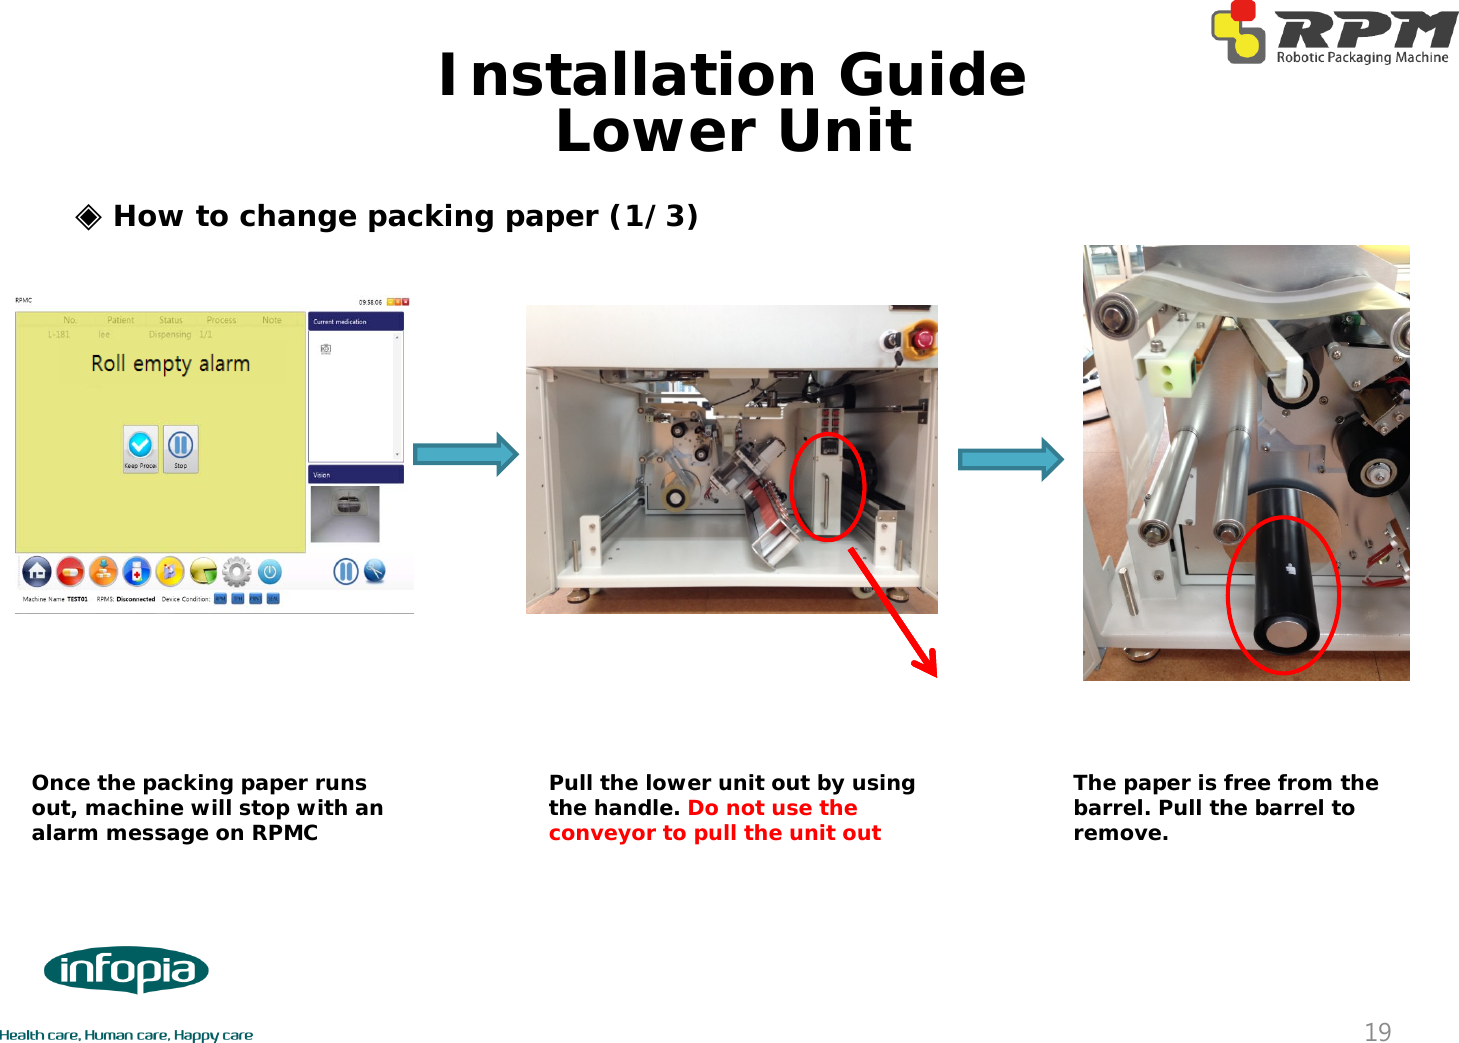 ◈How to change packing paper (1/3)Pull the lower unit out by using the handle. Do not use the conveyor to pull the unit outThe paper is free from the barrel. Pull the barrel to remove.Once the packing paper runs out, machine will stop with an alarm message on RPMC19Lower UnitInstallation Guide